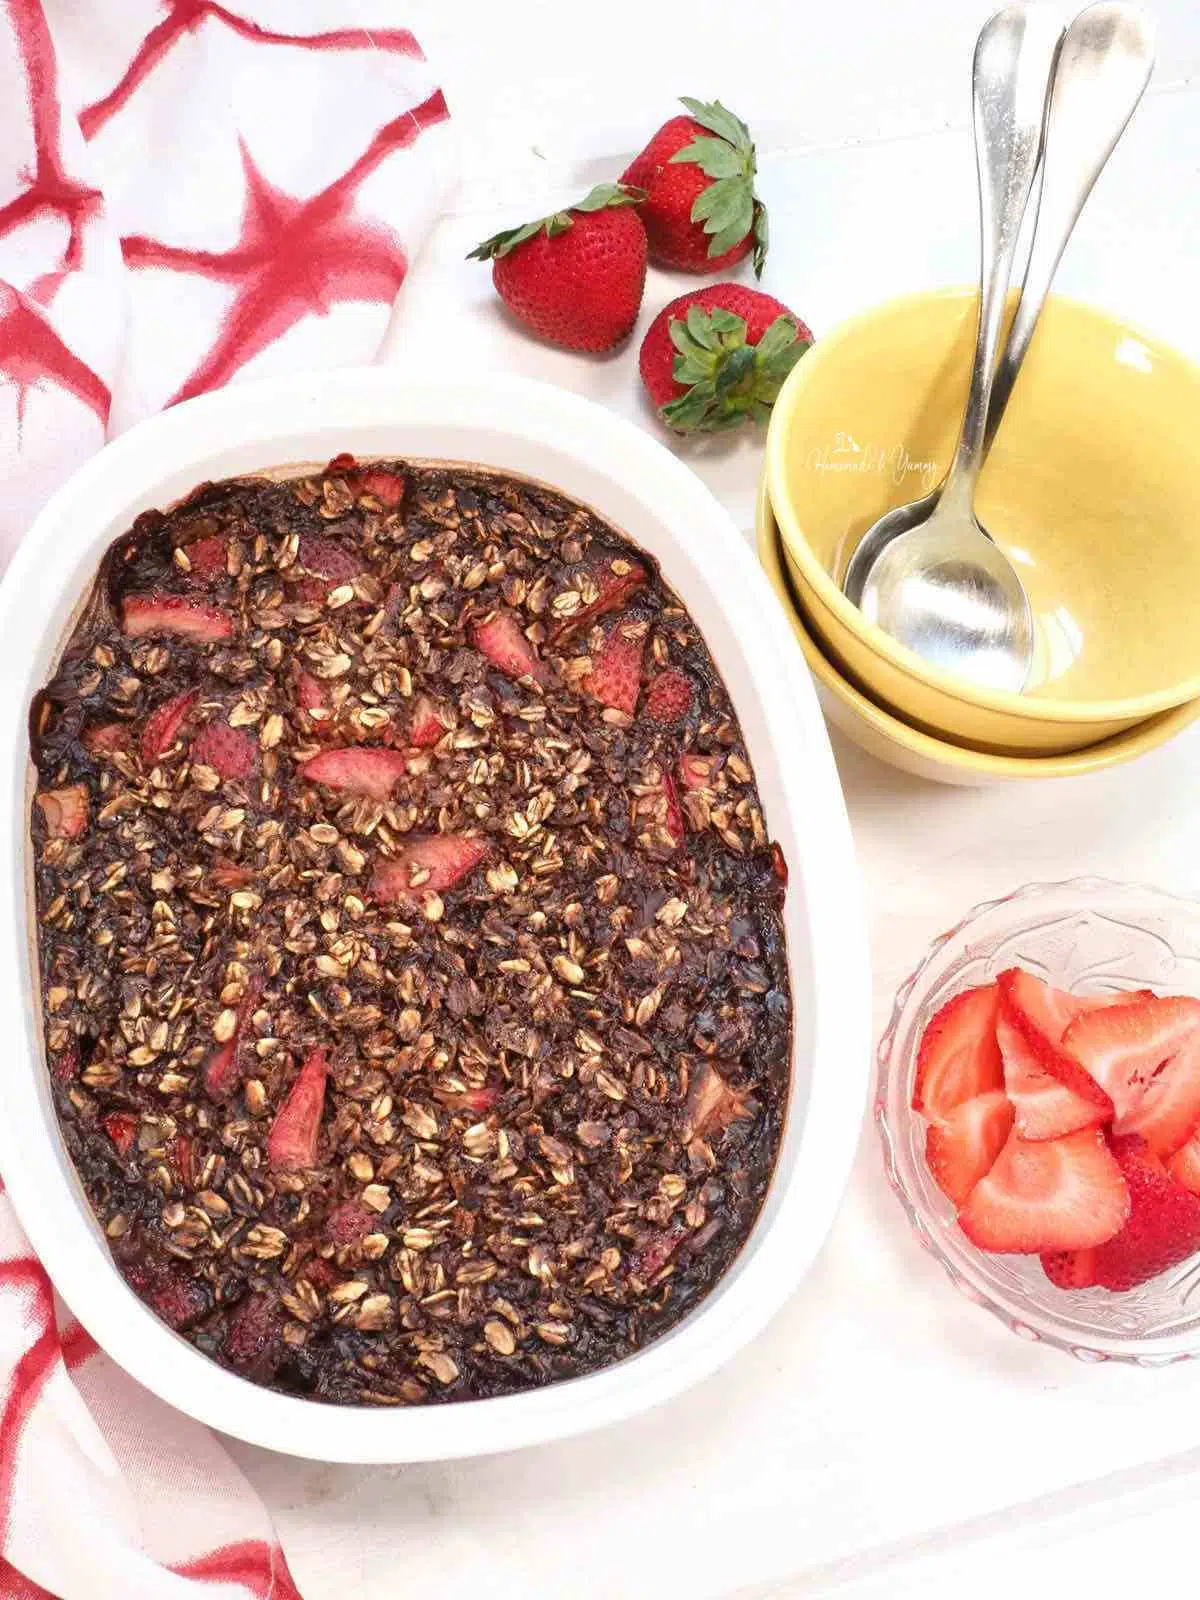 Chocolate baked oats with strawberries ready to eat.